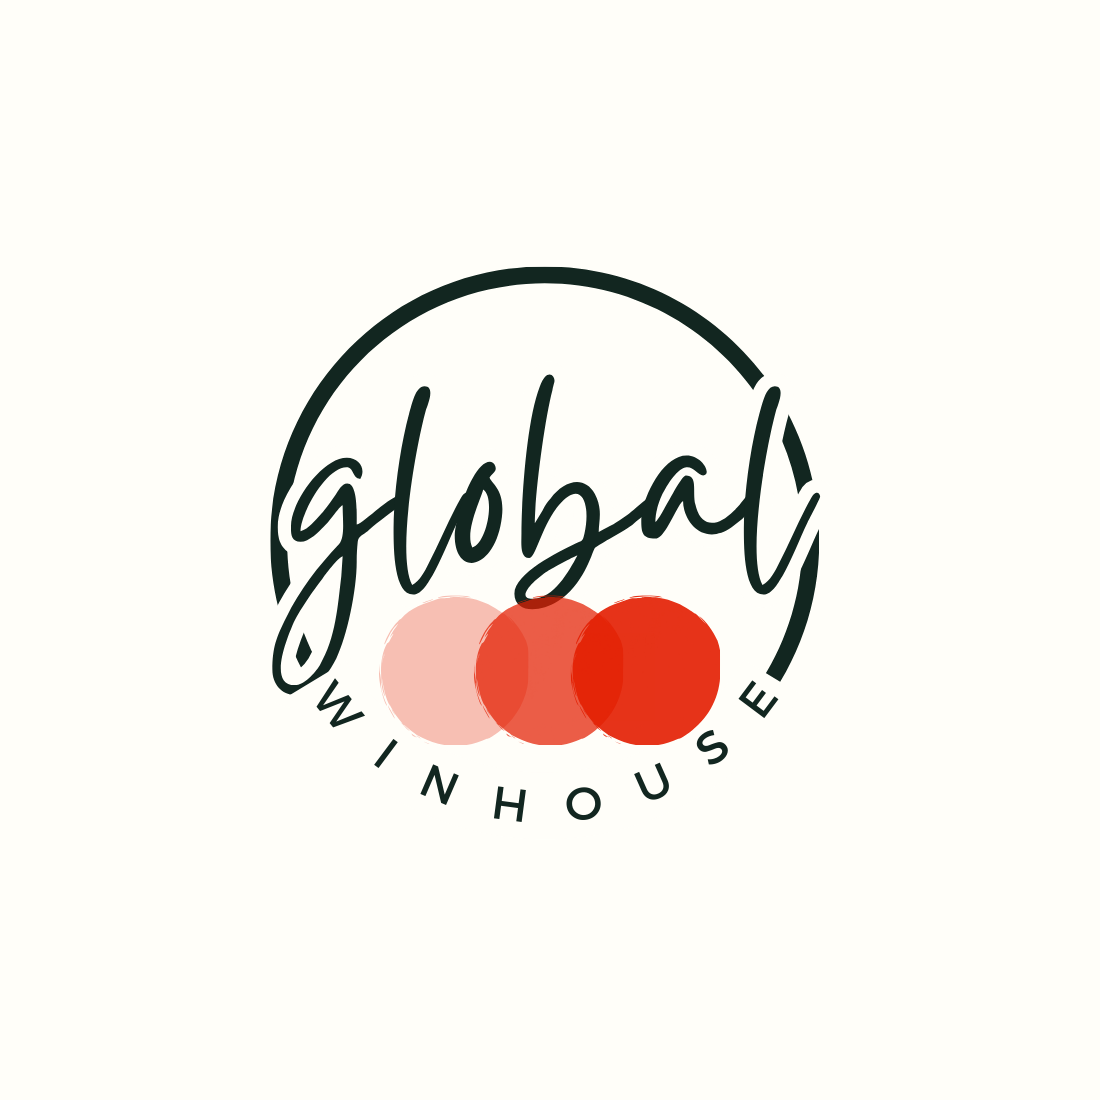 Stylish Global Logo with Handwritten Text and Abstract Circles cover image.